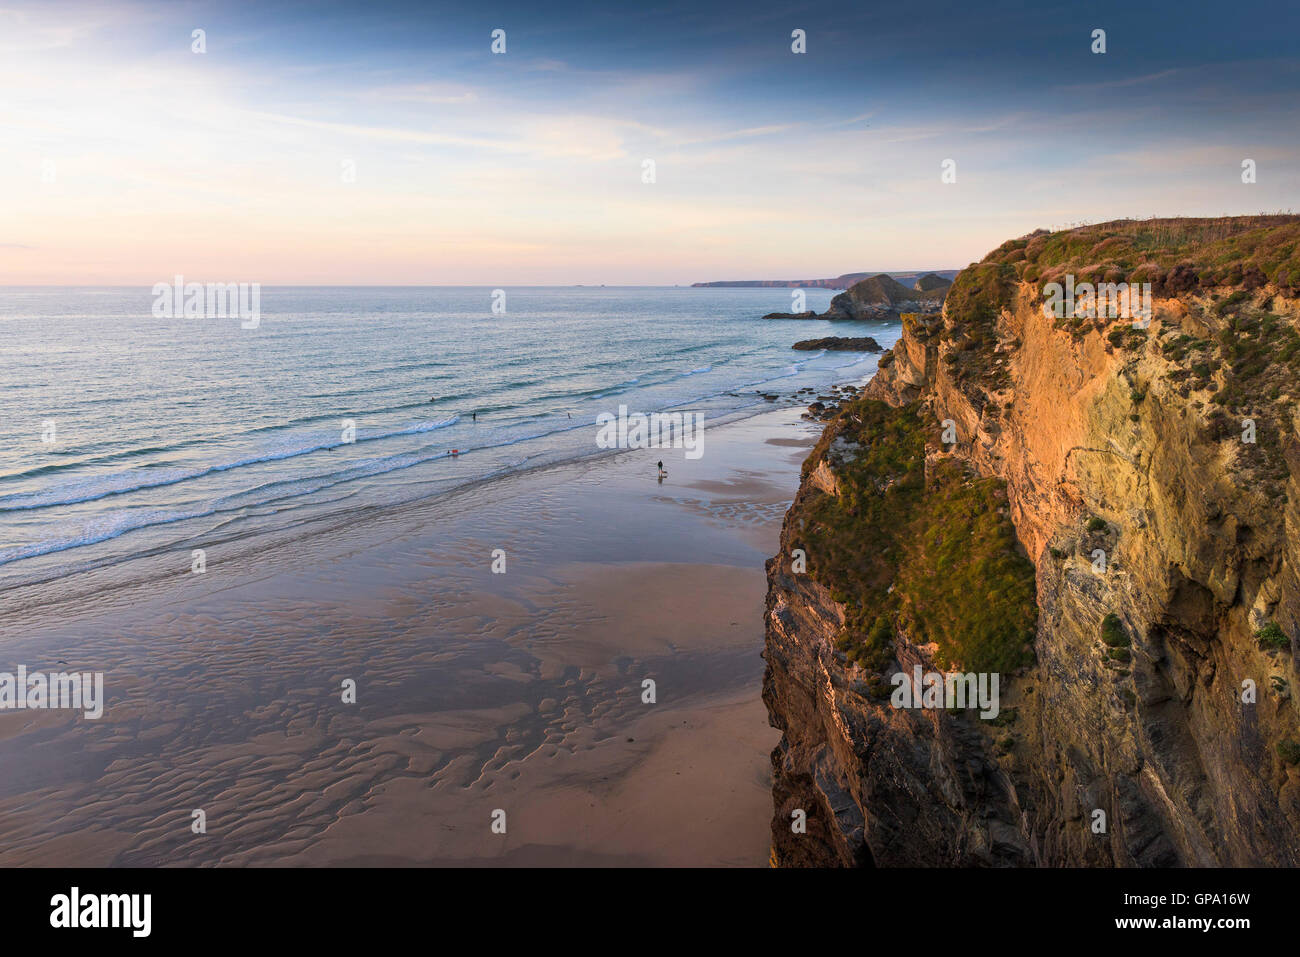 Evening light over Whipsiderry Beach and cliffs in Newquay, Cornwall. Stock Photo